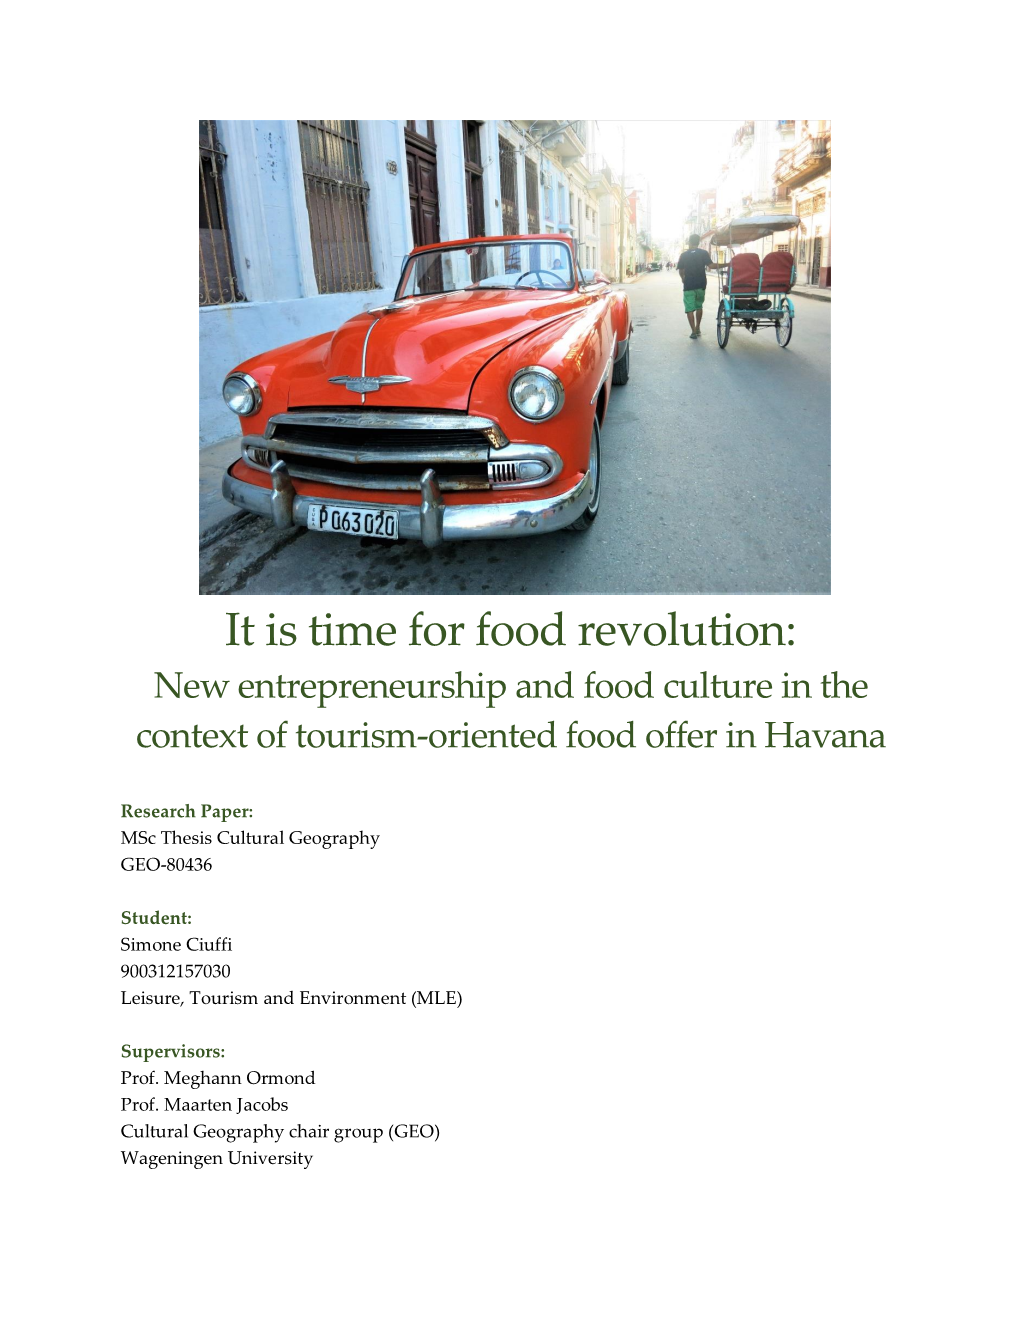 It Is Time for Food Revolution: New Entrepreneurship and Food Culture in the Context of Tourism-Oriented Food Offer in Havana